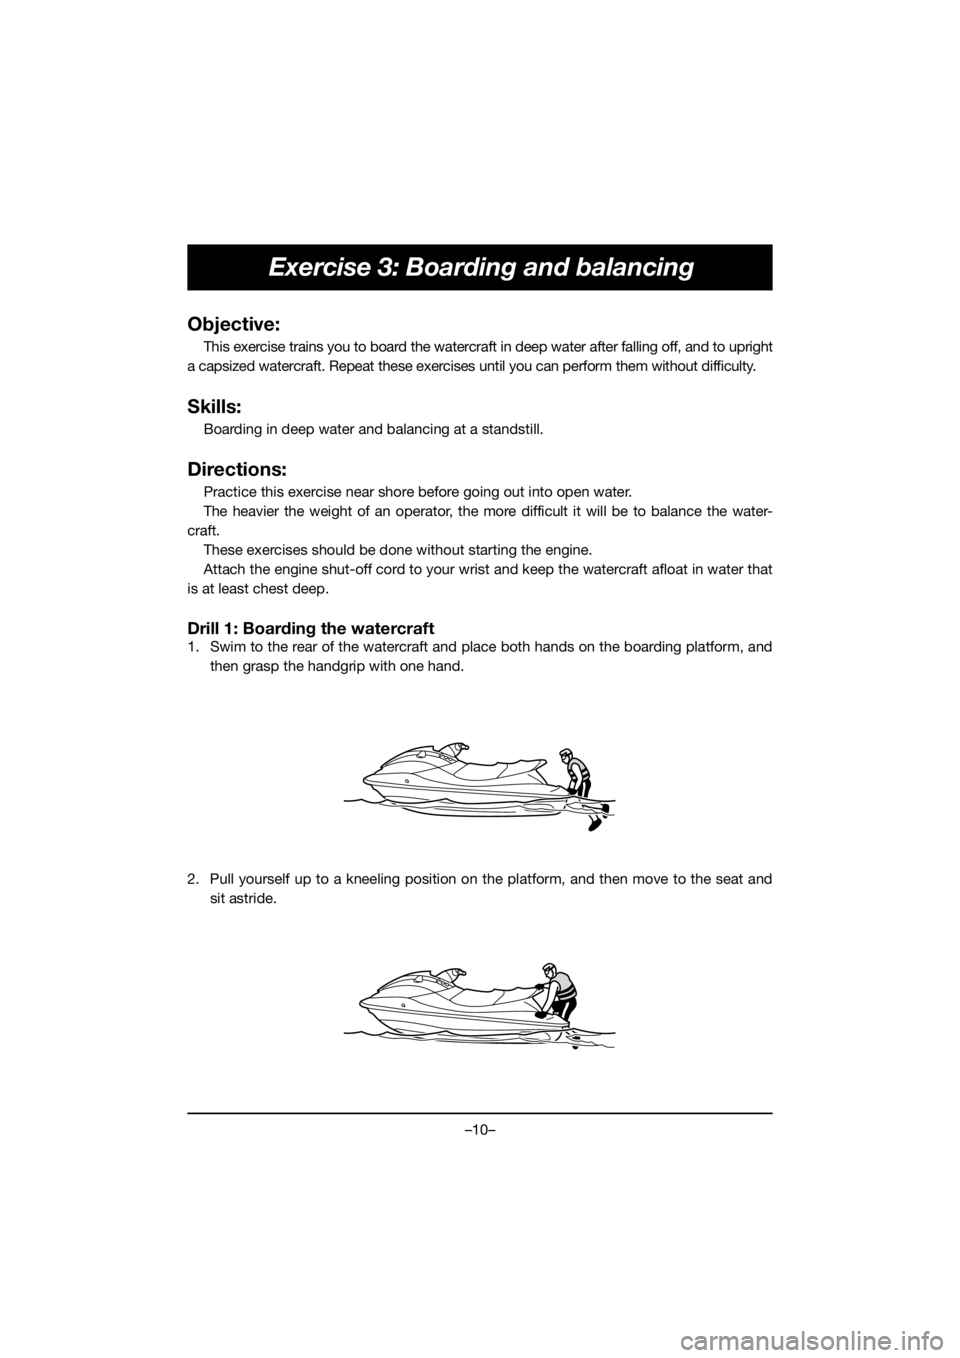 YAMAHA EXR 2020  Notices Demploi (in French) –10–
Exercise 3: Boarding and balancing
Objective:
This exercise trains you to board the watercraft in deep water after falling off, and to upright
a capsized watercraft. Repeat these exercises un